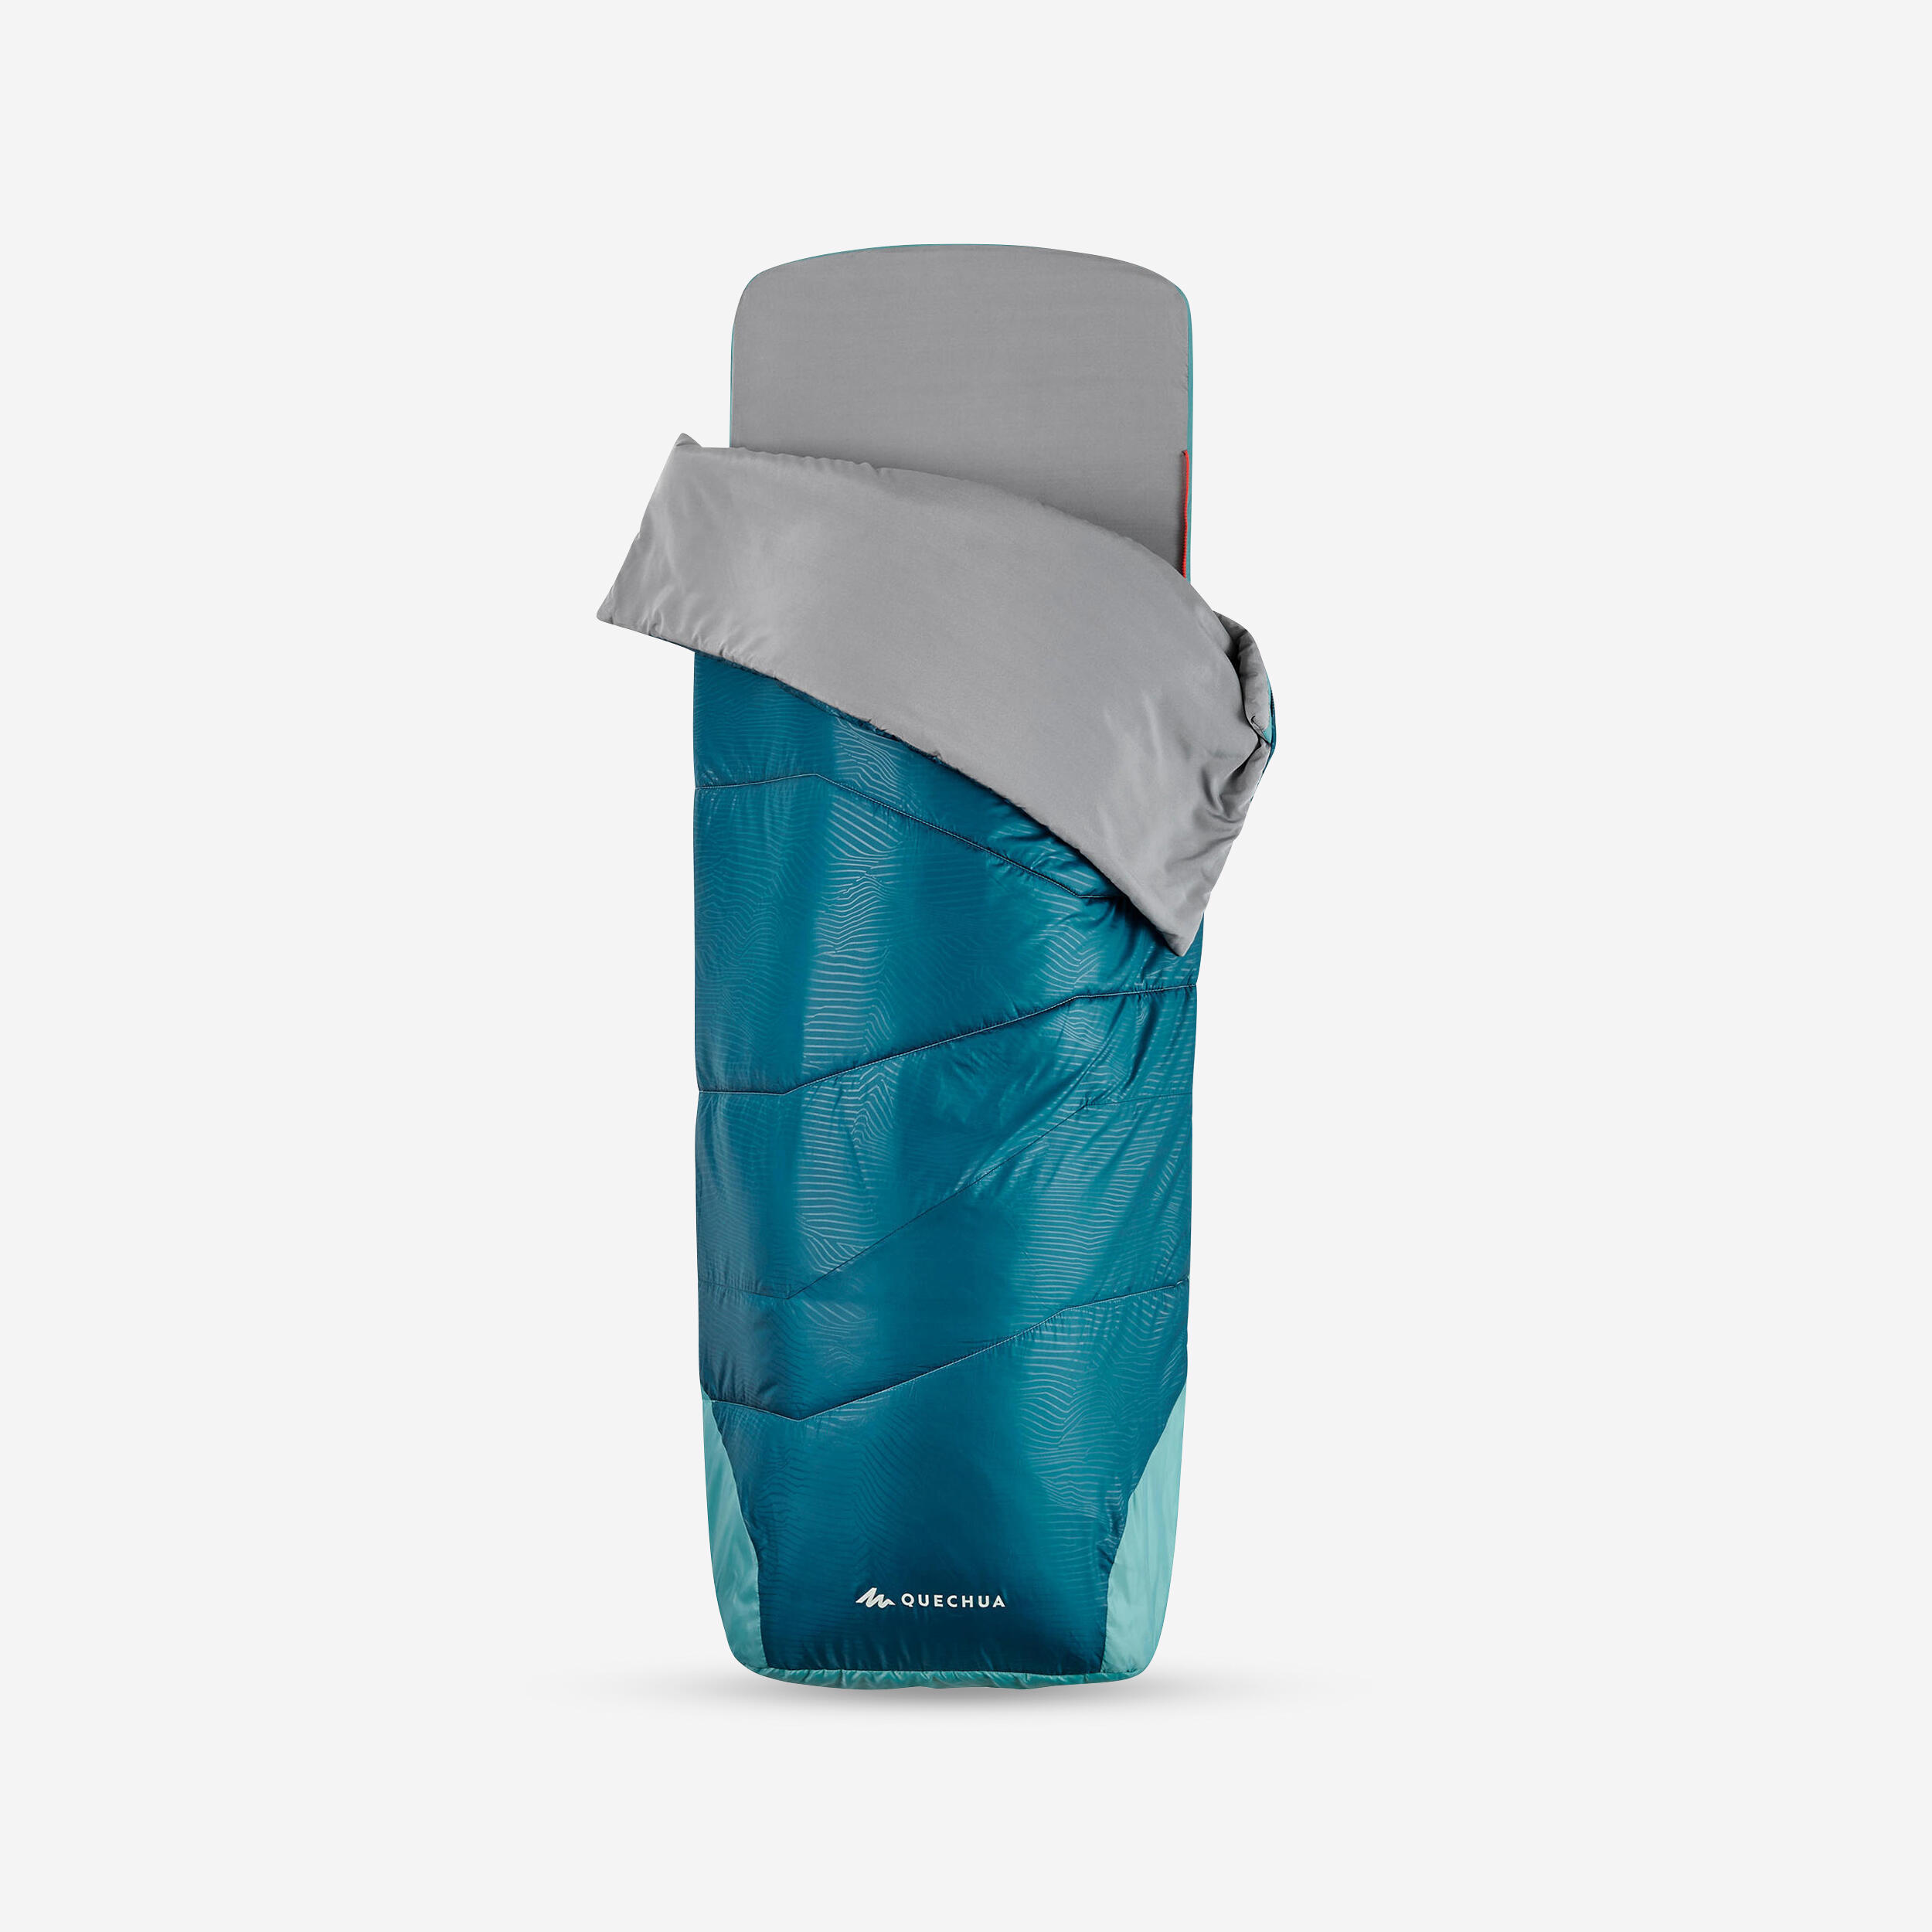 REPLACEMENT SLEEPING BAG FOR SLEEPIN BED MH500 15°C L 1/1